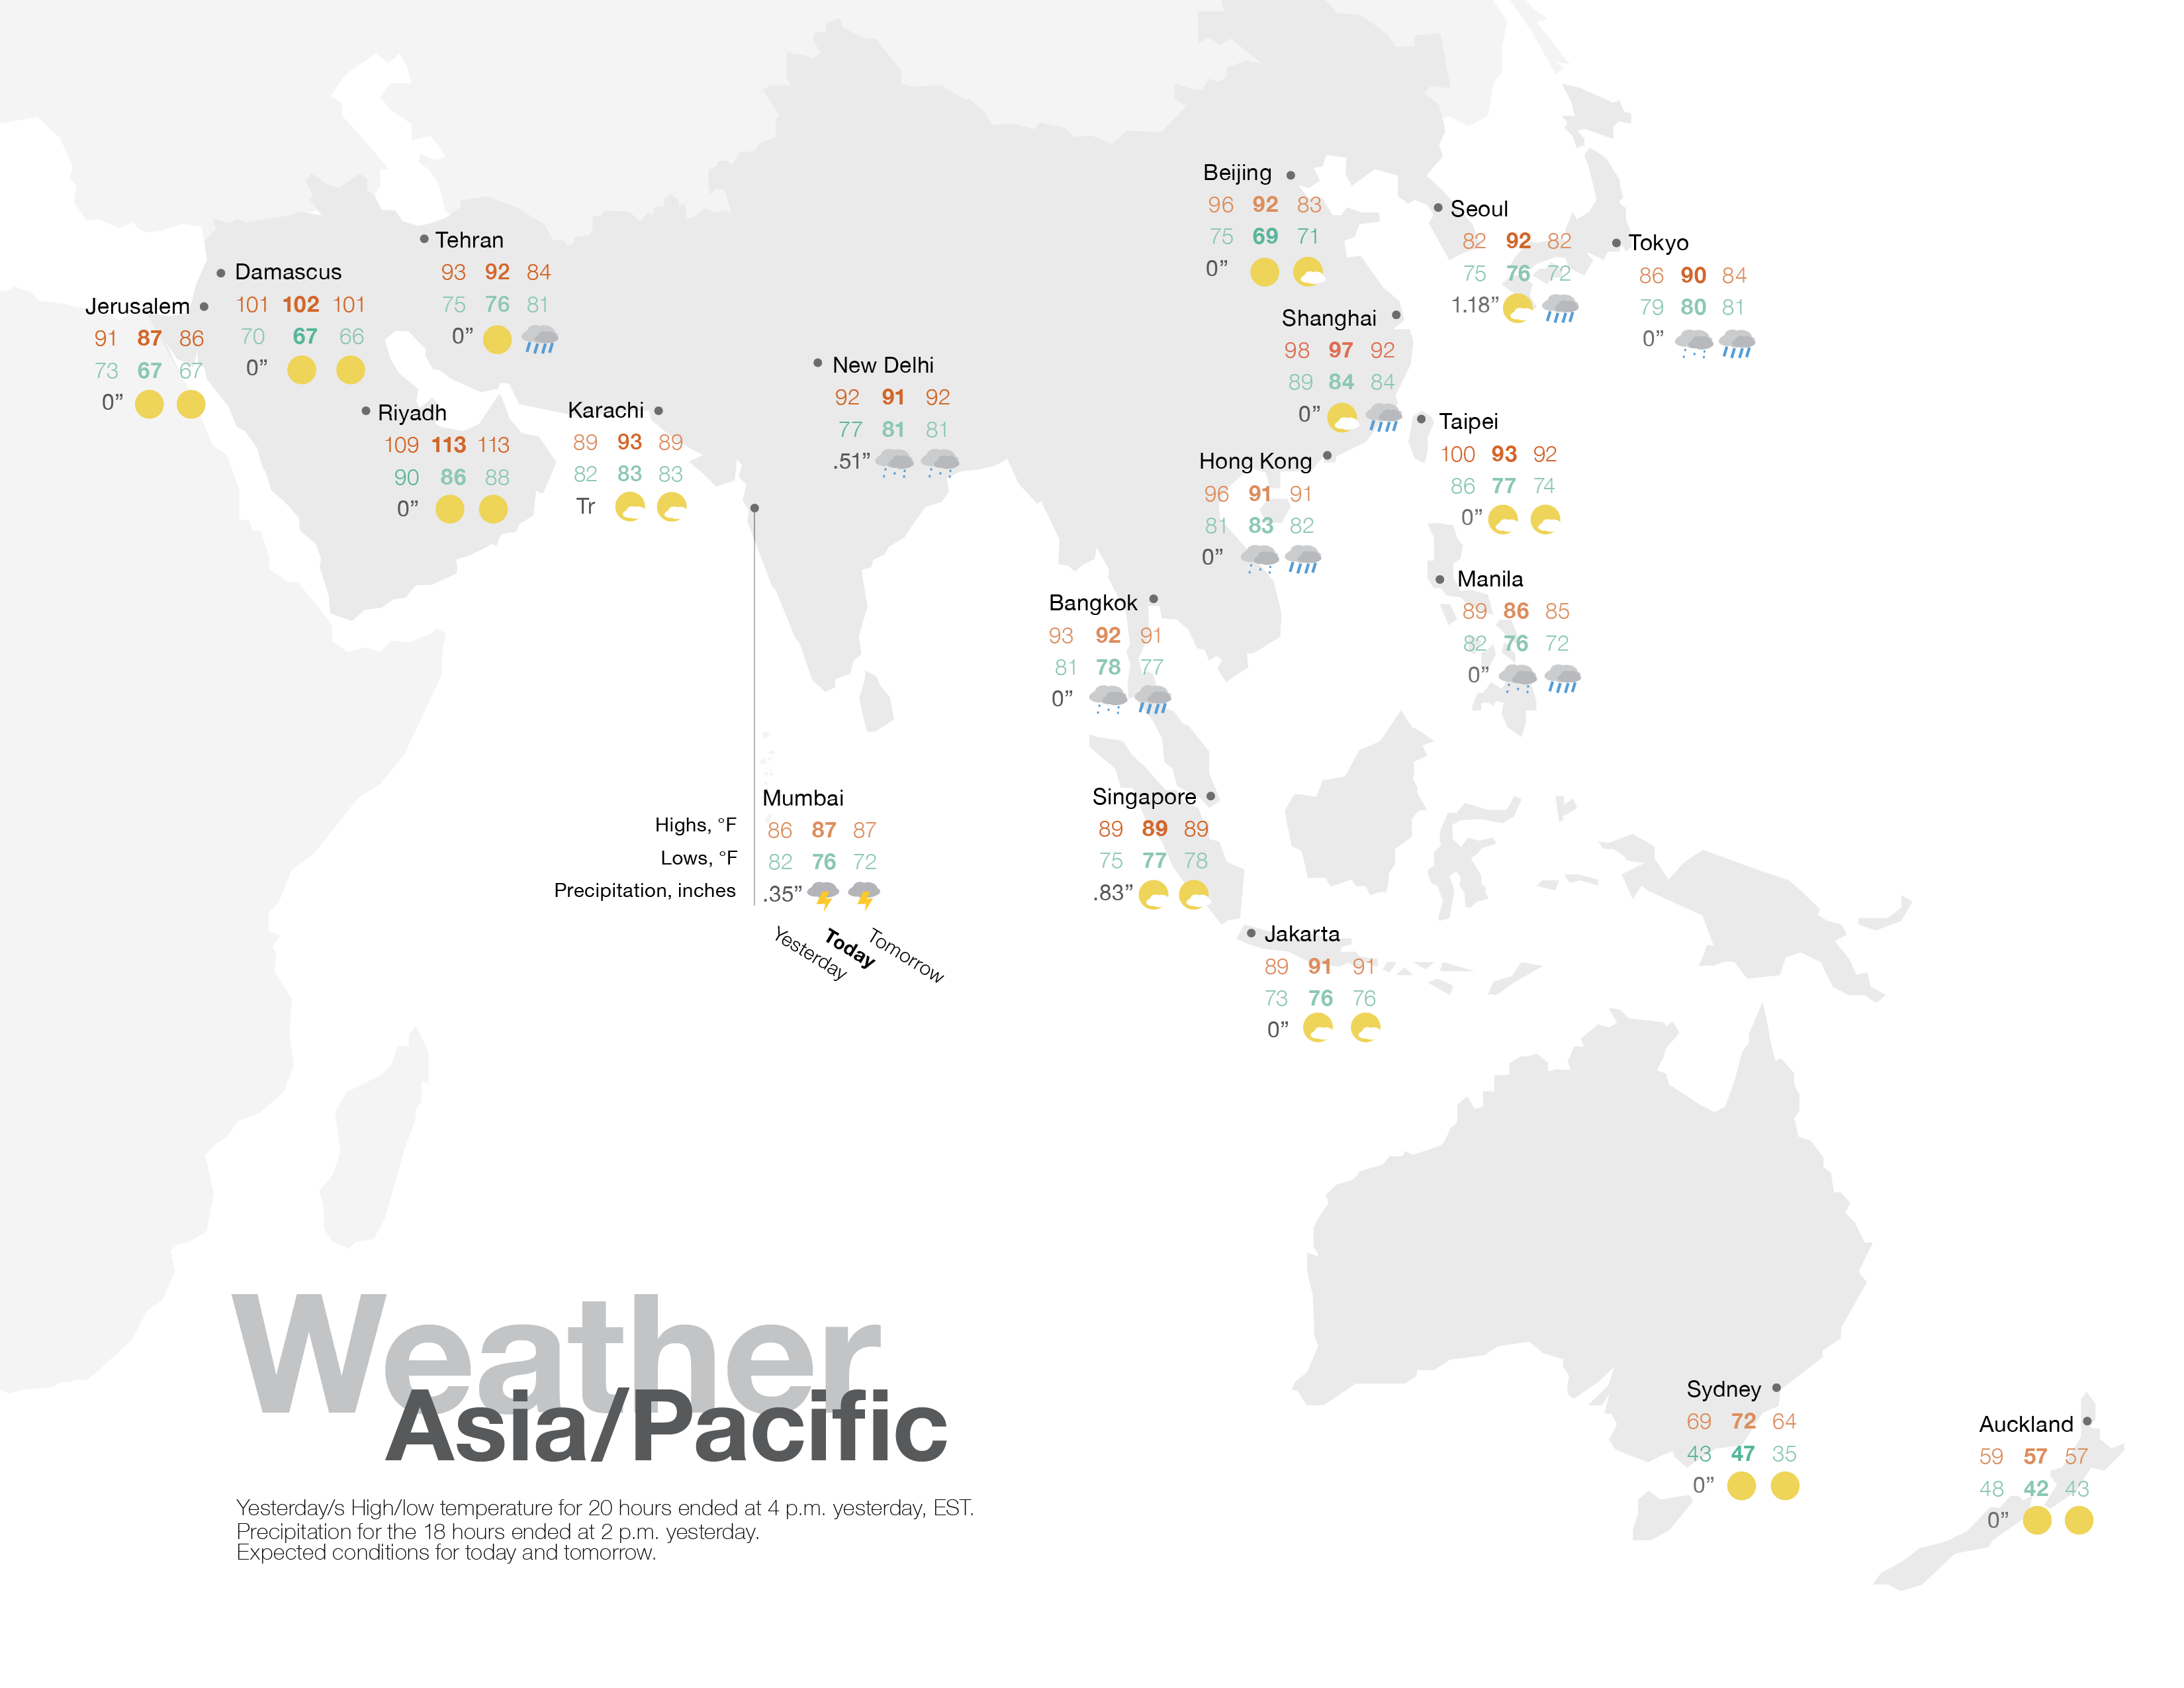 A map of Asia showing weather data as an example of communication design.